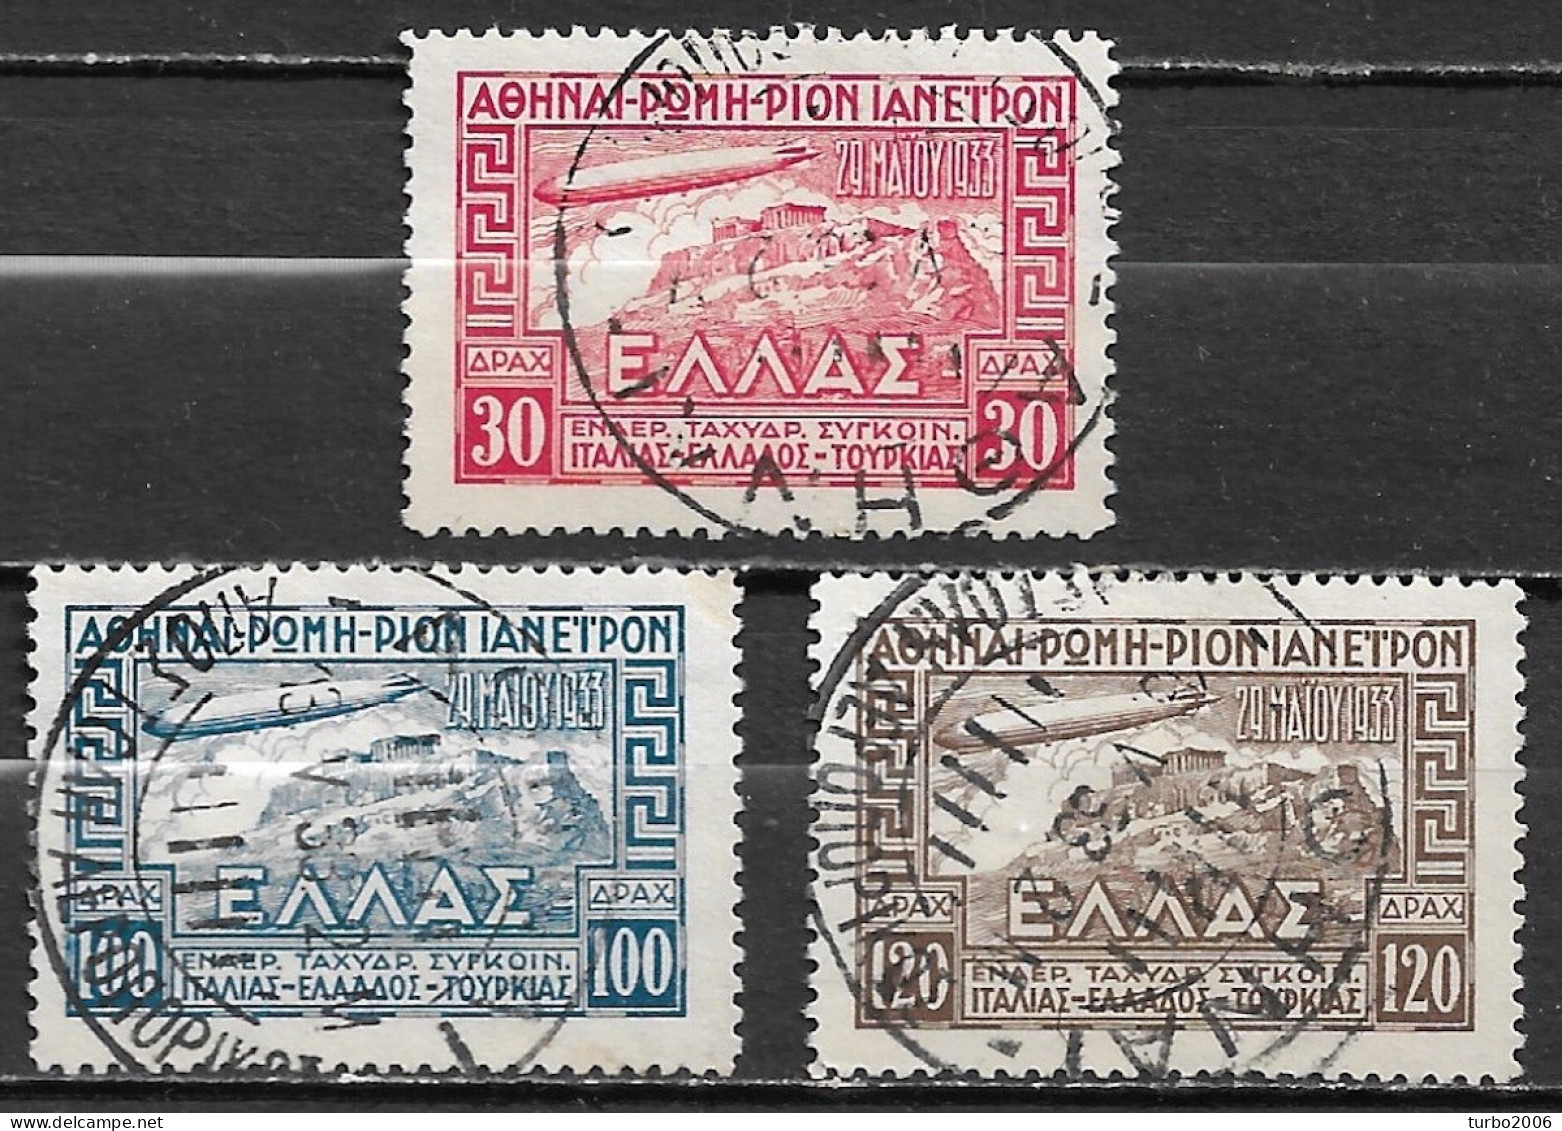 GREECE 1933 Airmail Zeppelin Issue Complete Used Set Vl. A 5 / 7 - Used Stamps